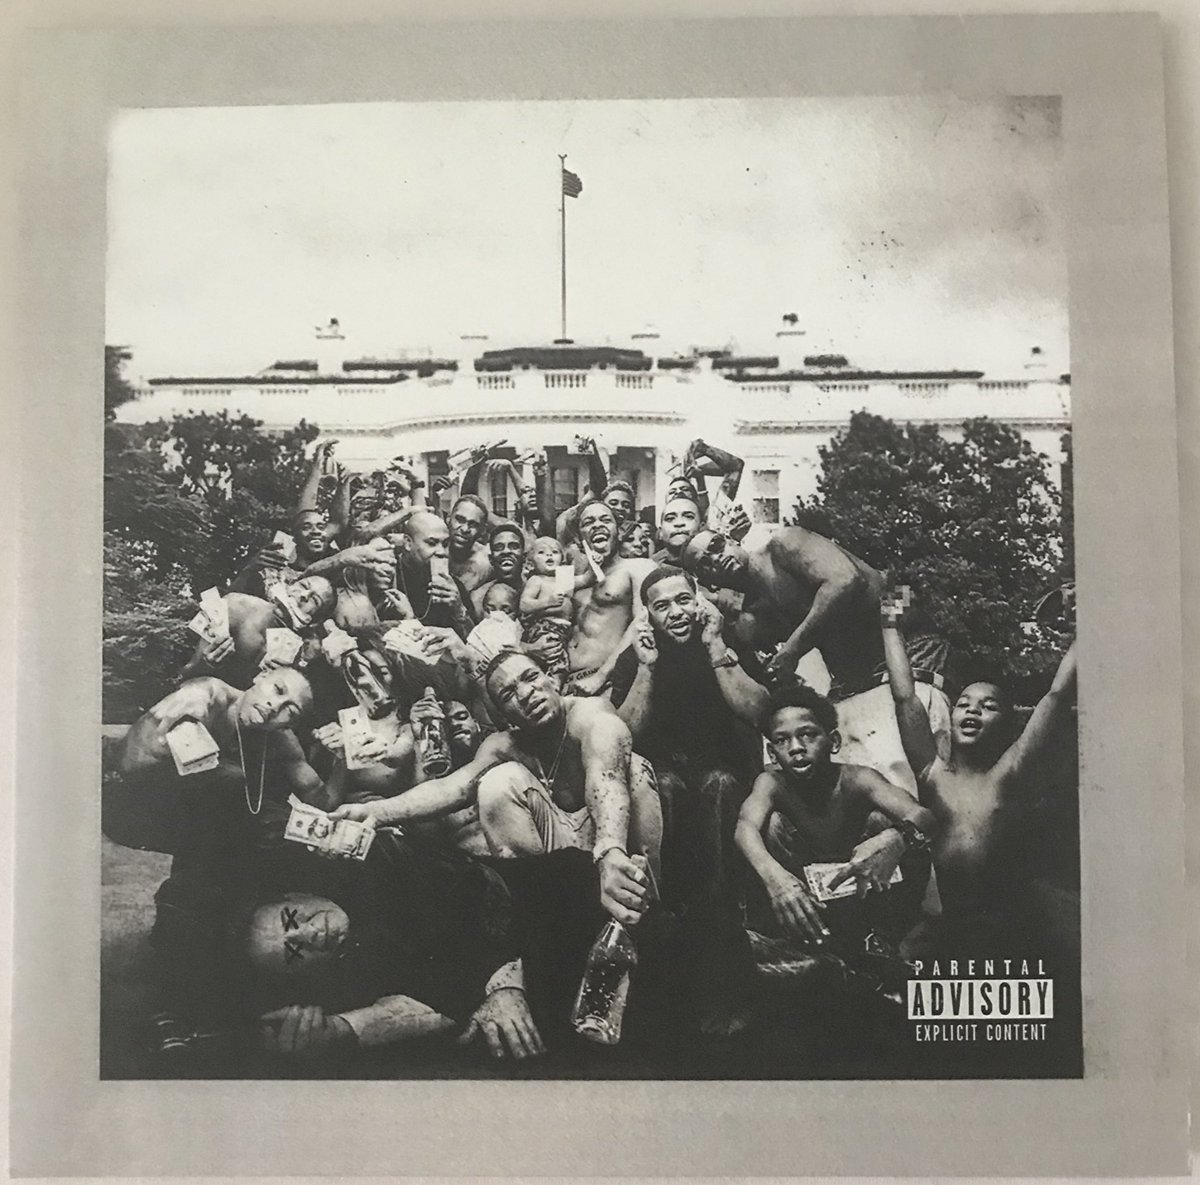 Kendrick Lamar - To Pimp A ButterflyIncludes:To Pimp A Butterfly (2xLP)Rating: 10/10